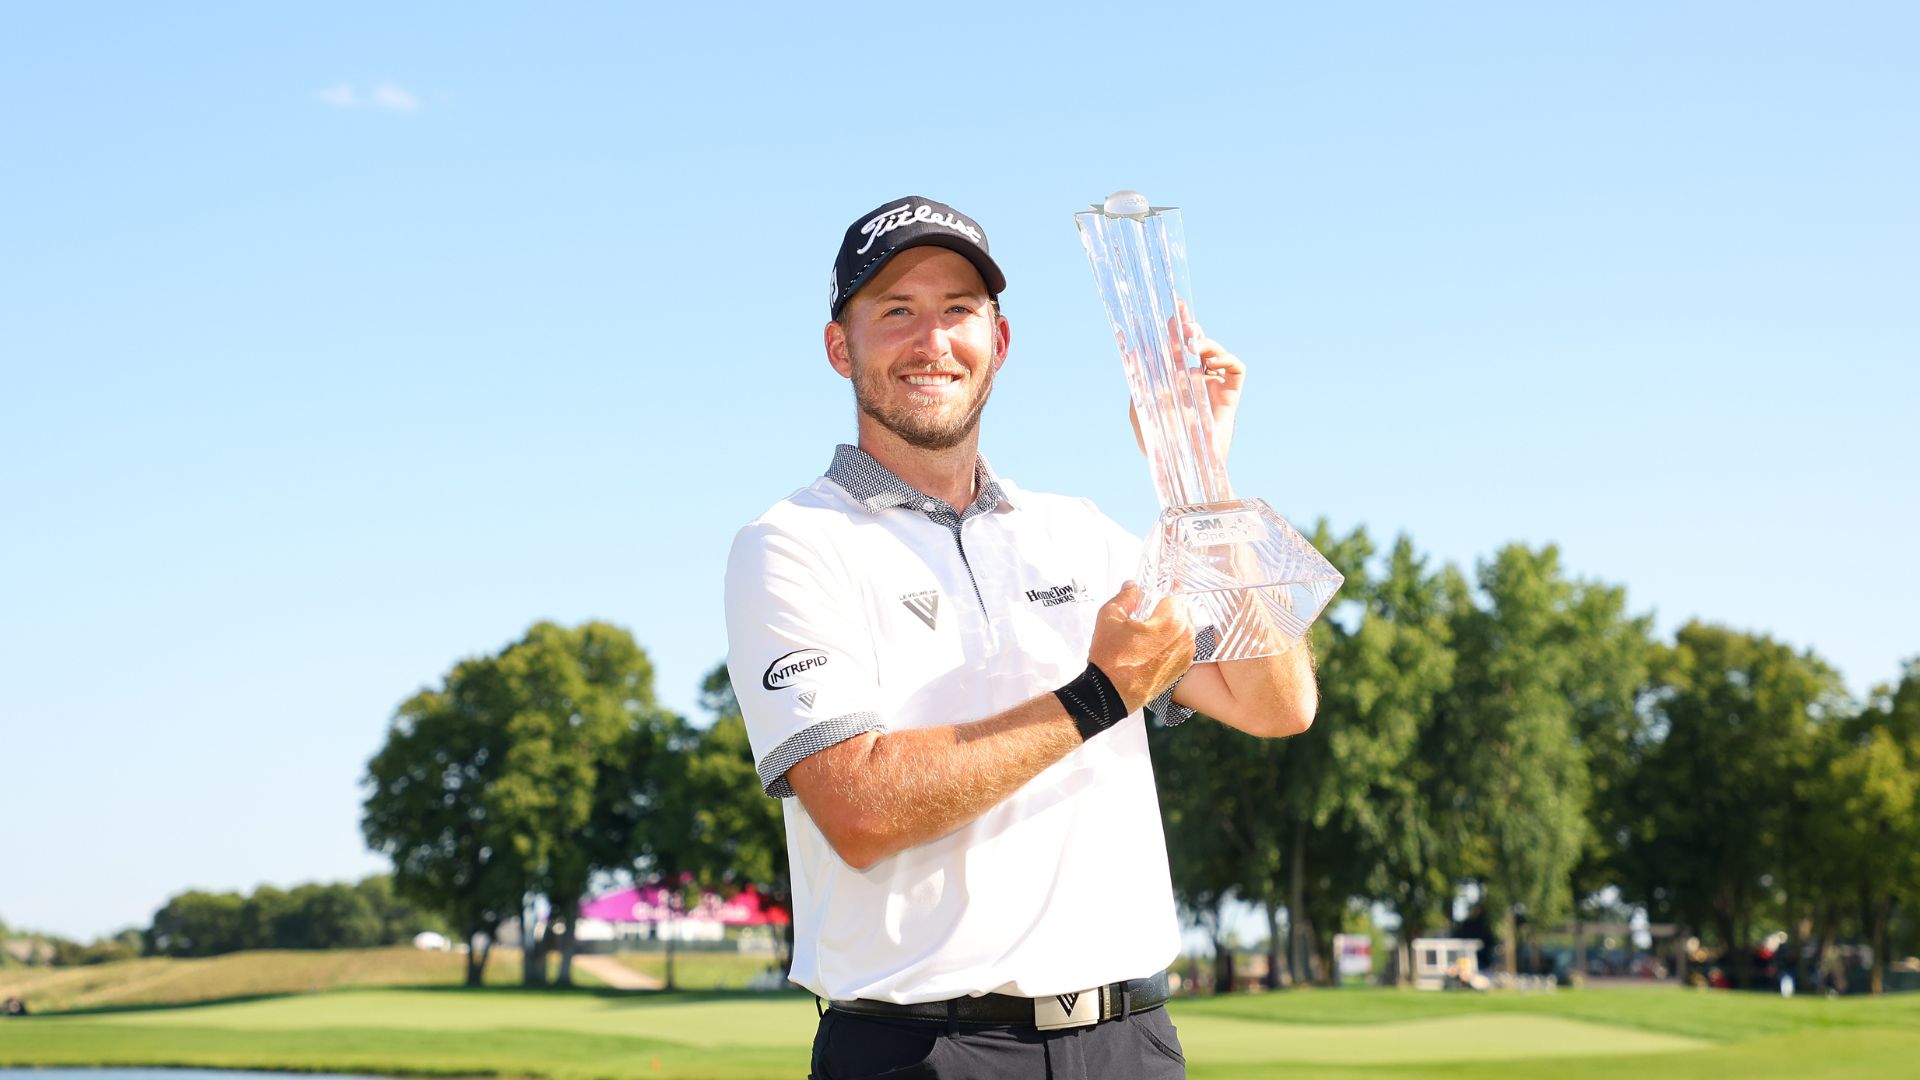 Lee Hodges goes wire-to-wire to notch first PGA Tour win by seven shots at 3M Open